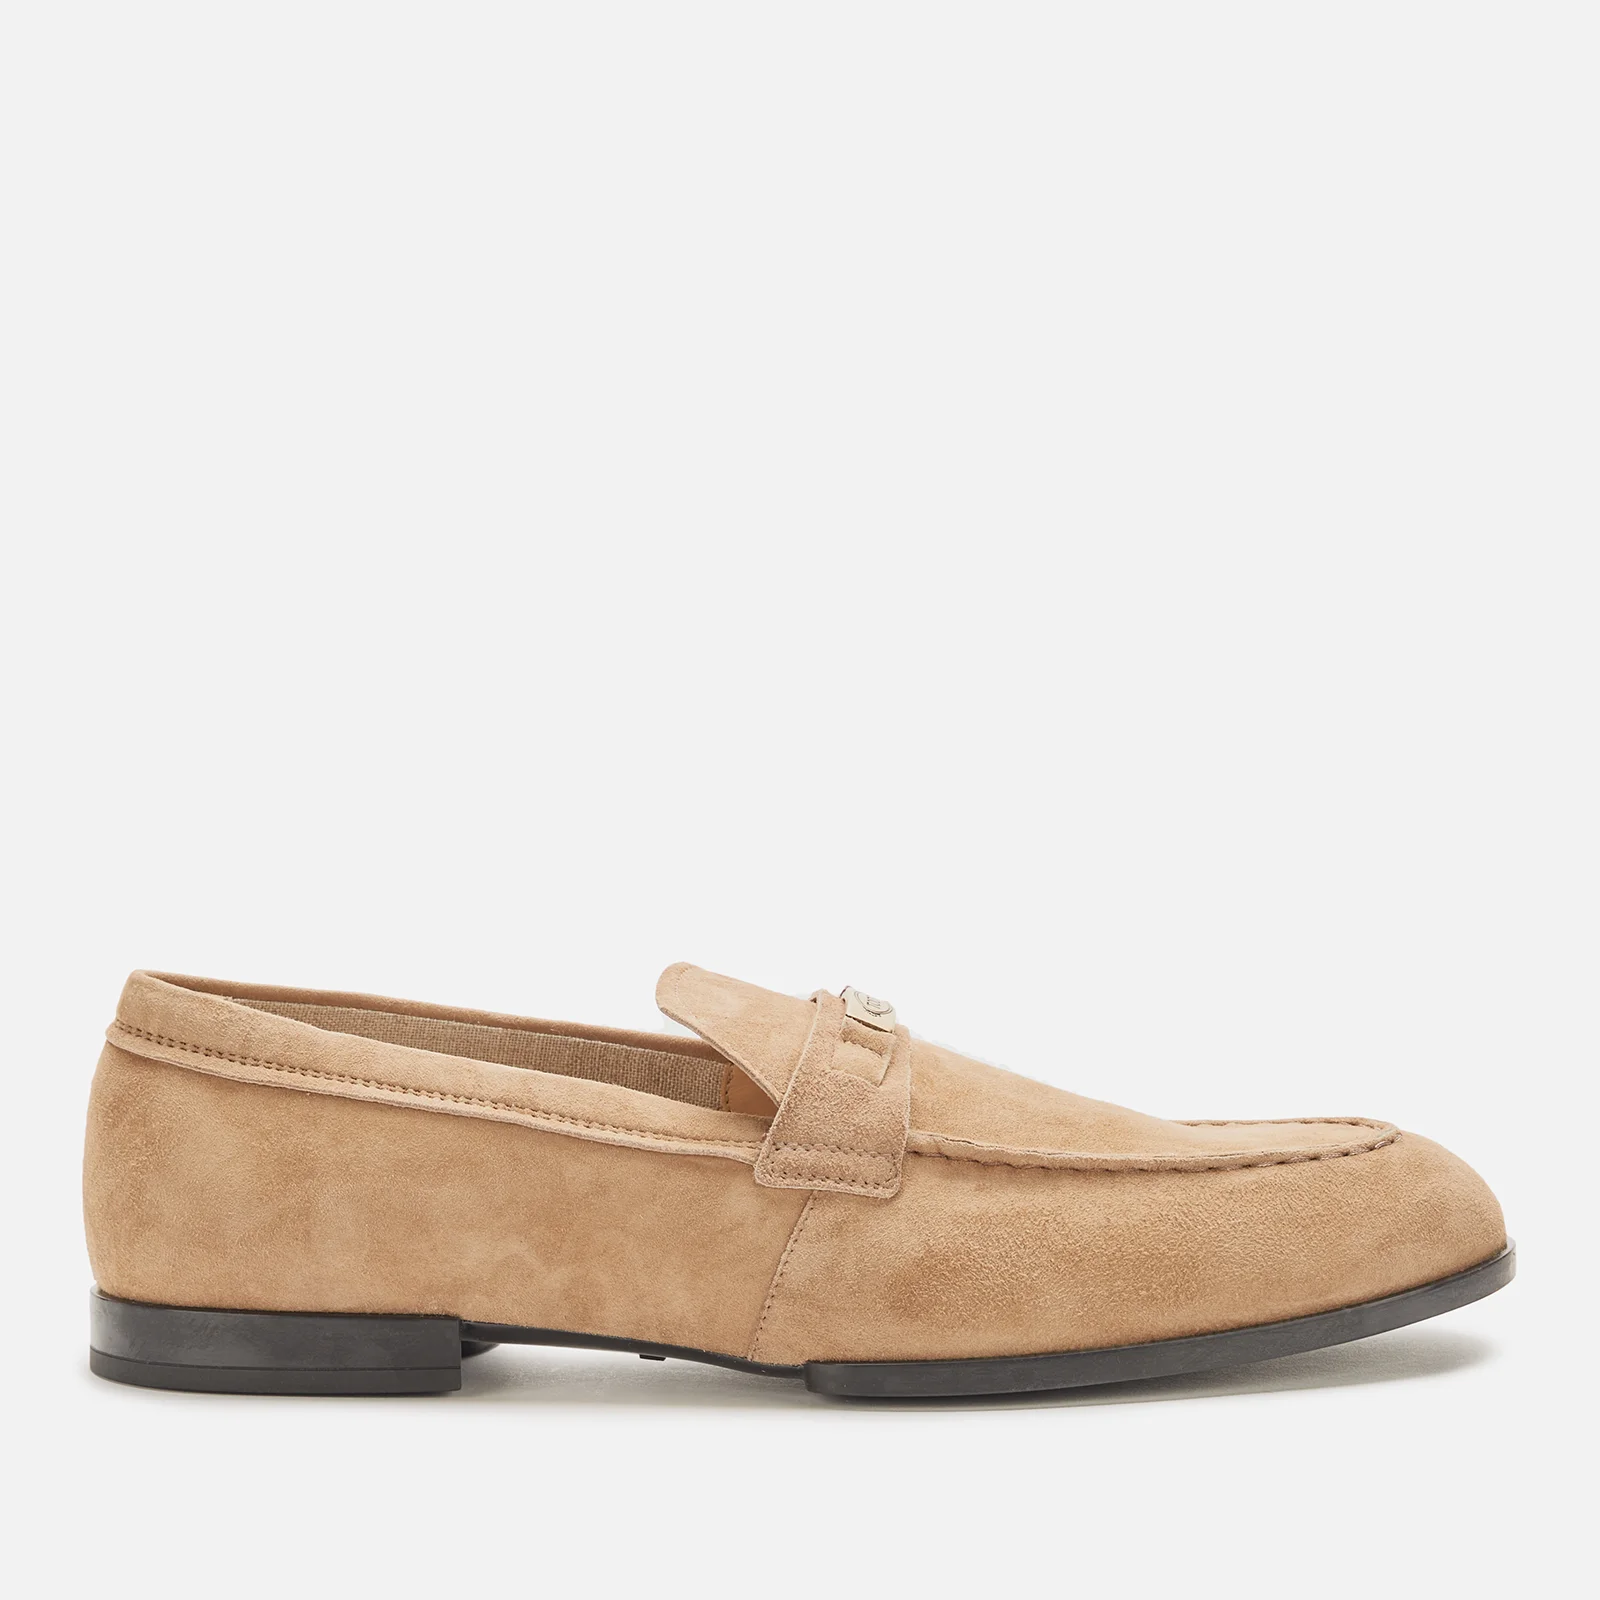 Tod's Men's Suede Loafers - Kaki Image 1